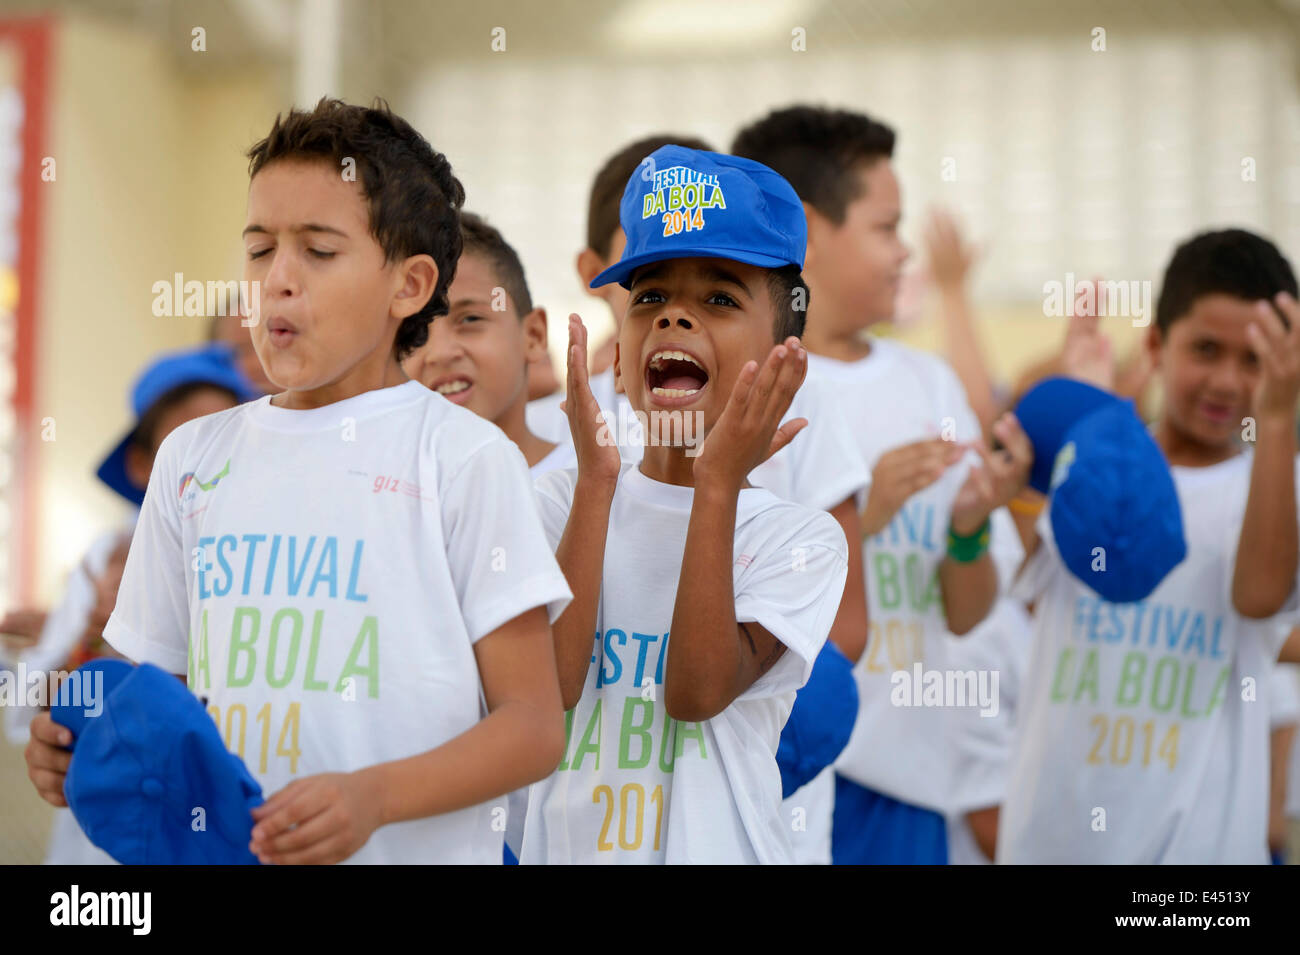 Children cheering on their team during a soccer tournament, Fortaleza, Ceara, Brazil Stock Photo